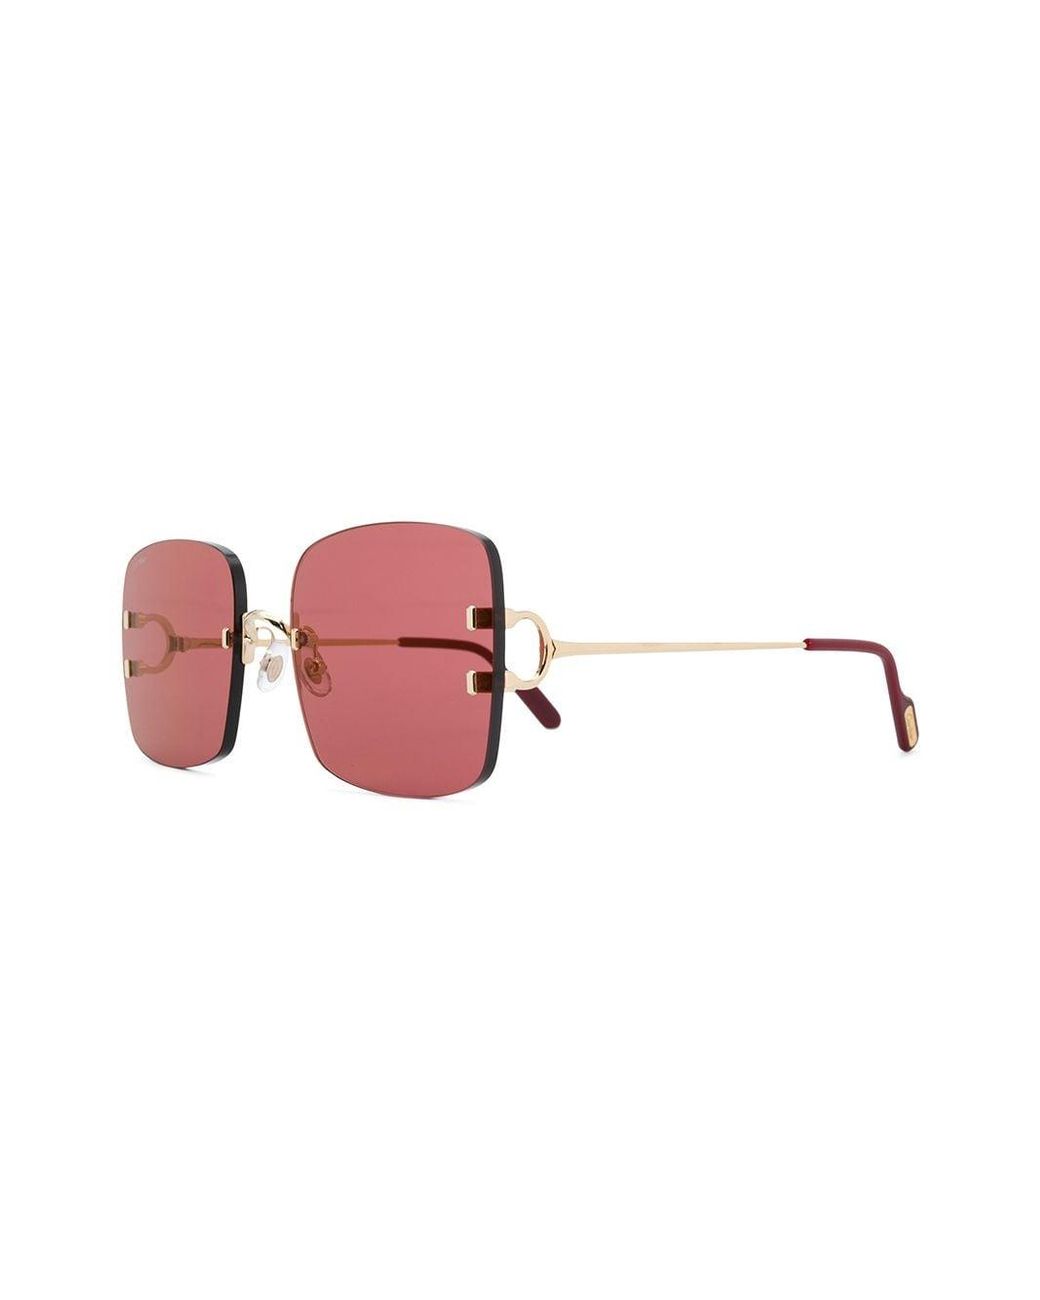 Cartier C Décor Rimless Square-frame Sunglasses in Red | Lyst